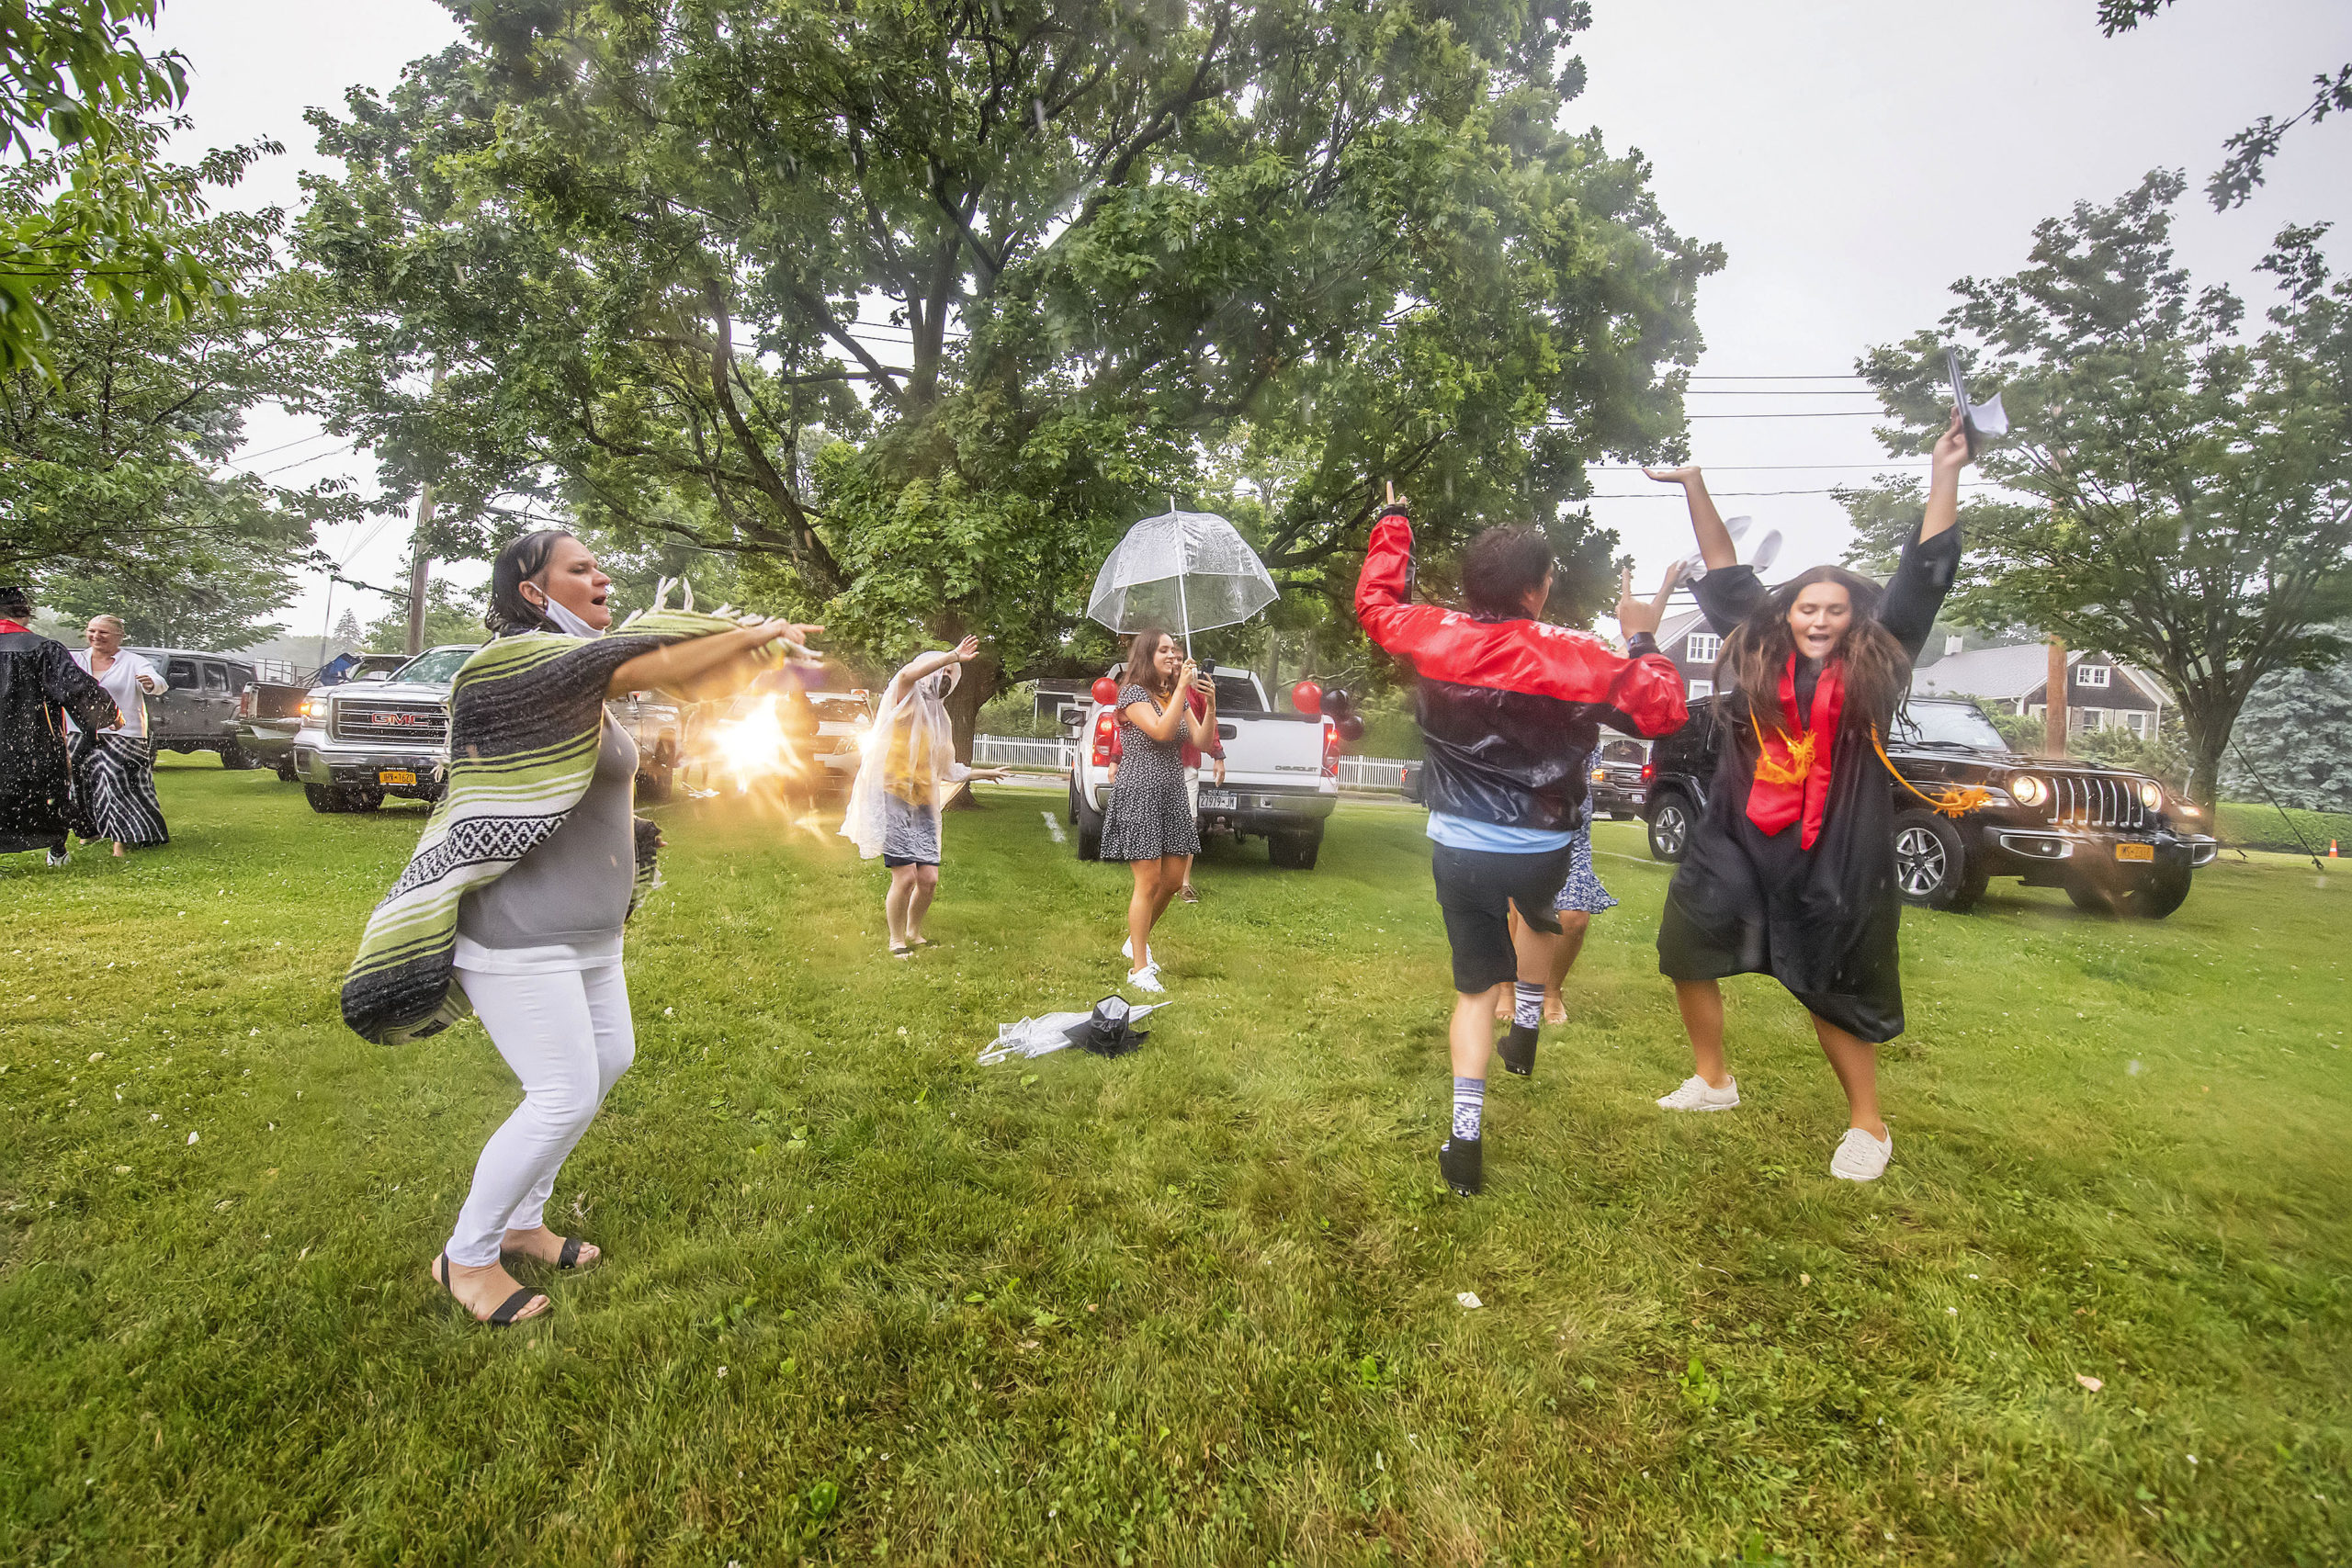 The Nill family dances for joy in the rain after daughter Haley - at far right- graduated in the Pierson High School 2020 Commencement Ceremony at Pierson High School on Saturday.